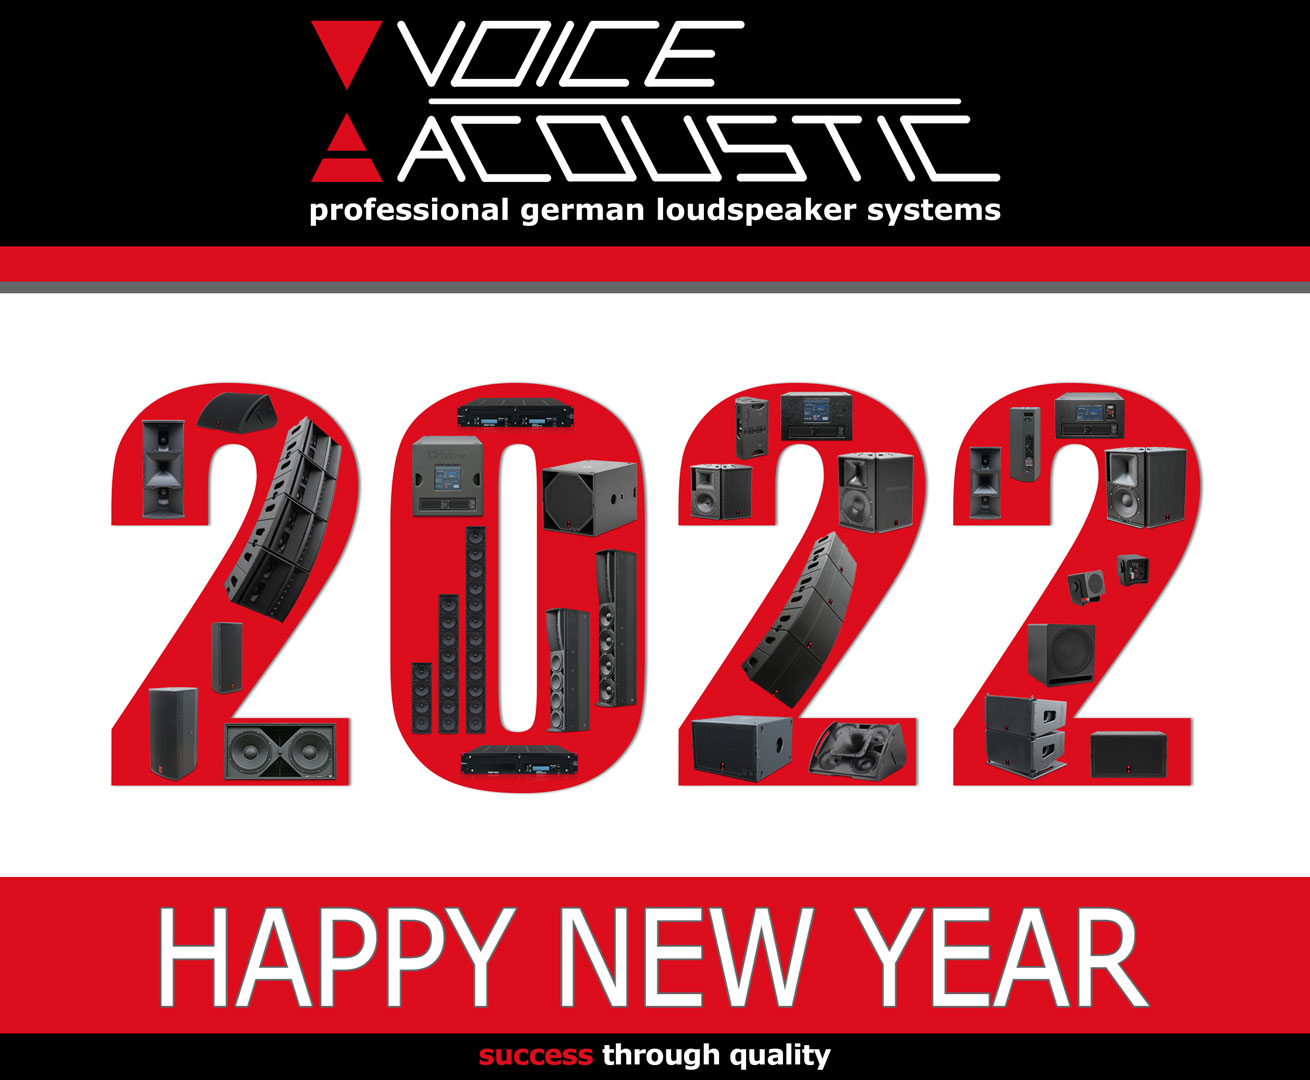 Voice-Acoustic wishes you a happy new year!